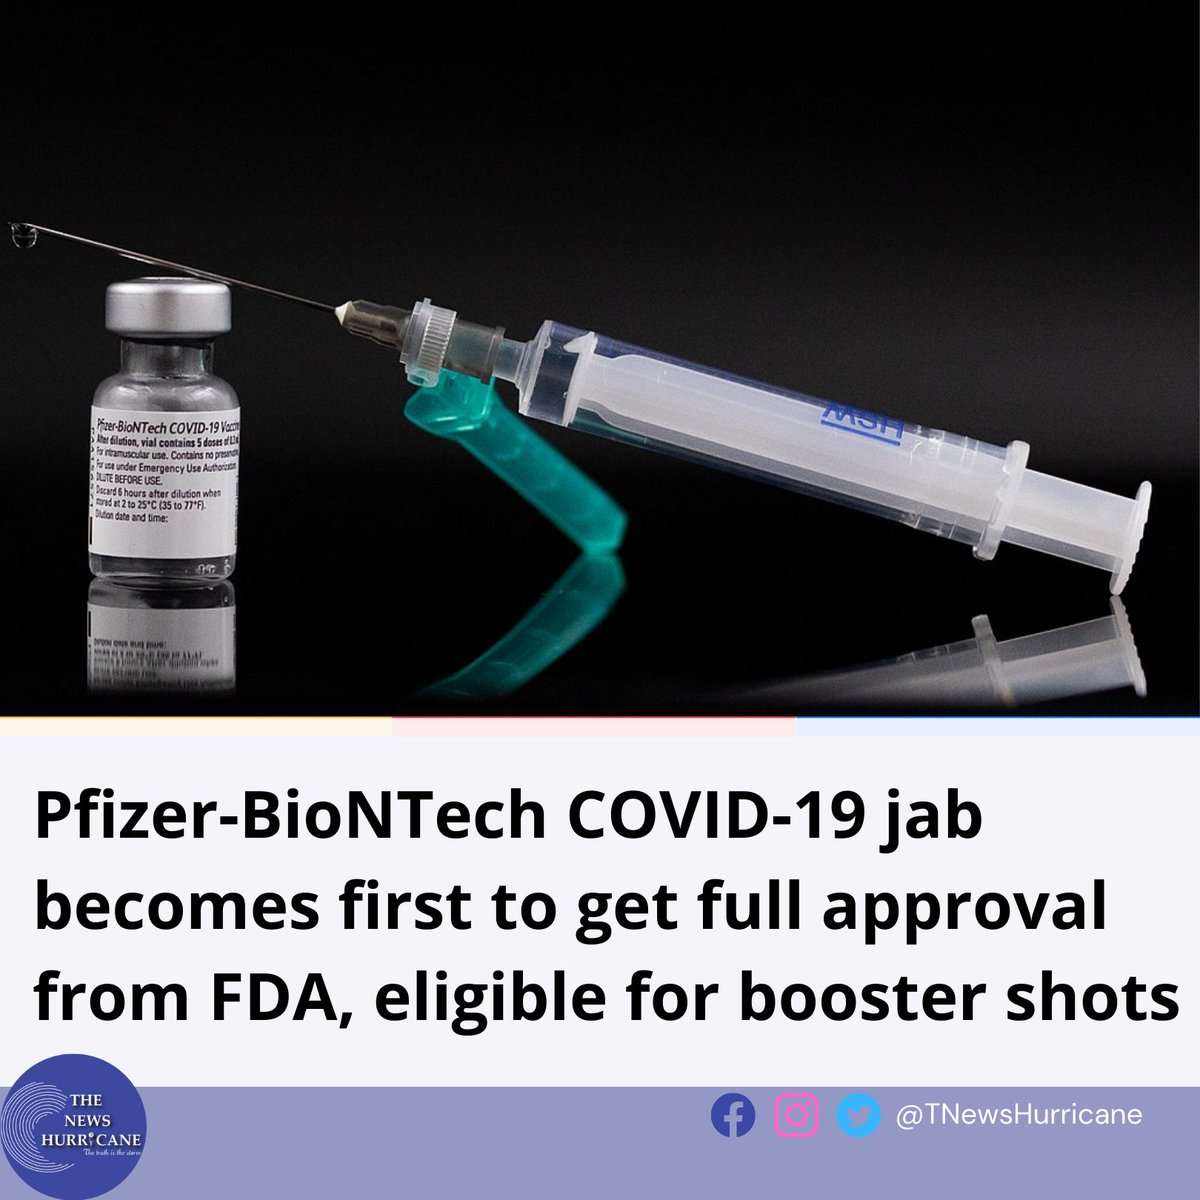 The United States Food and Drug Administration has given its full approval to the Pfizer-BioNTech COVID-19 vaccine. 
#Coronavirus #COVID19 #Pfizer #BioNTech #coronavirusvaccine #CoronavirusPandemic #FDA  #FDAapproved @US_FDA